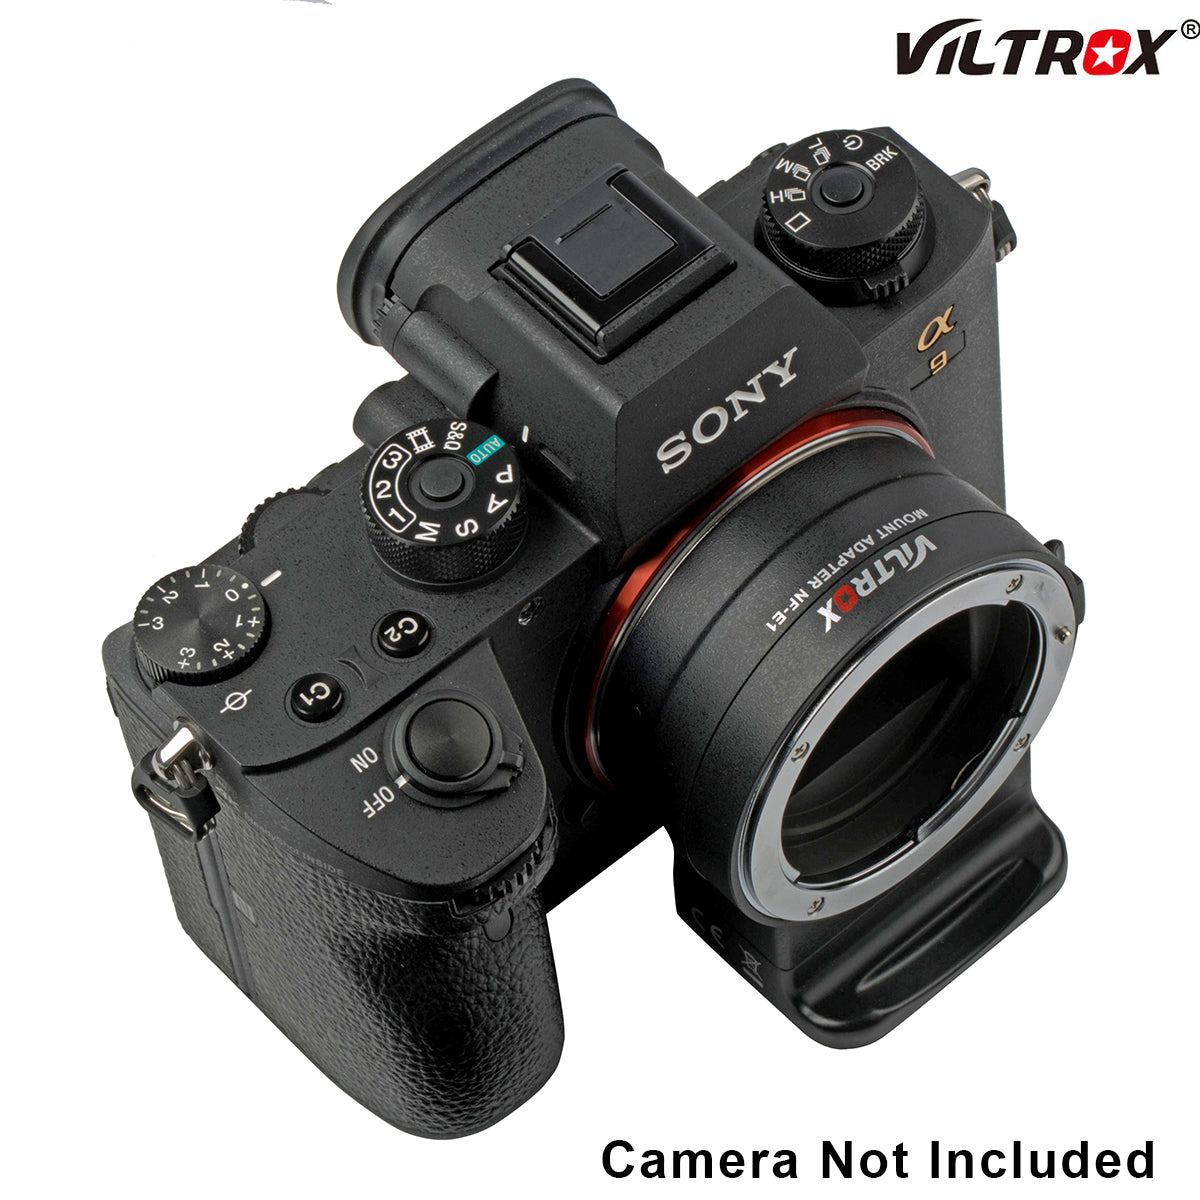 Viltrox AF Adapter for Nikon F Lenses to use on Sony E-Mount Cameras